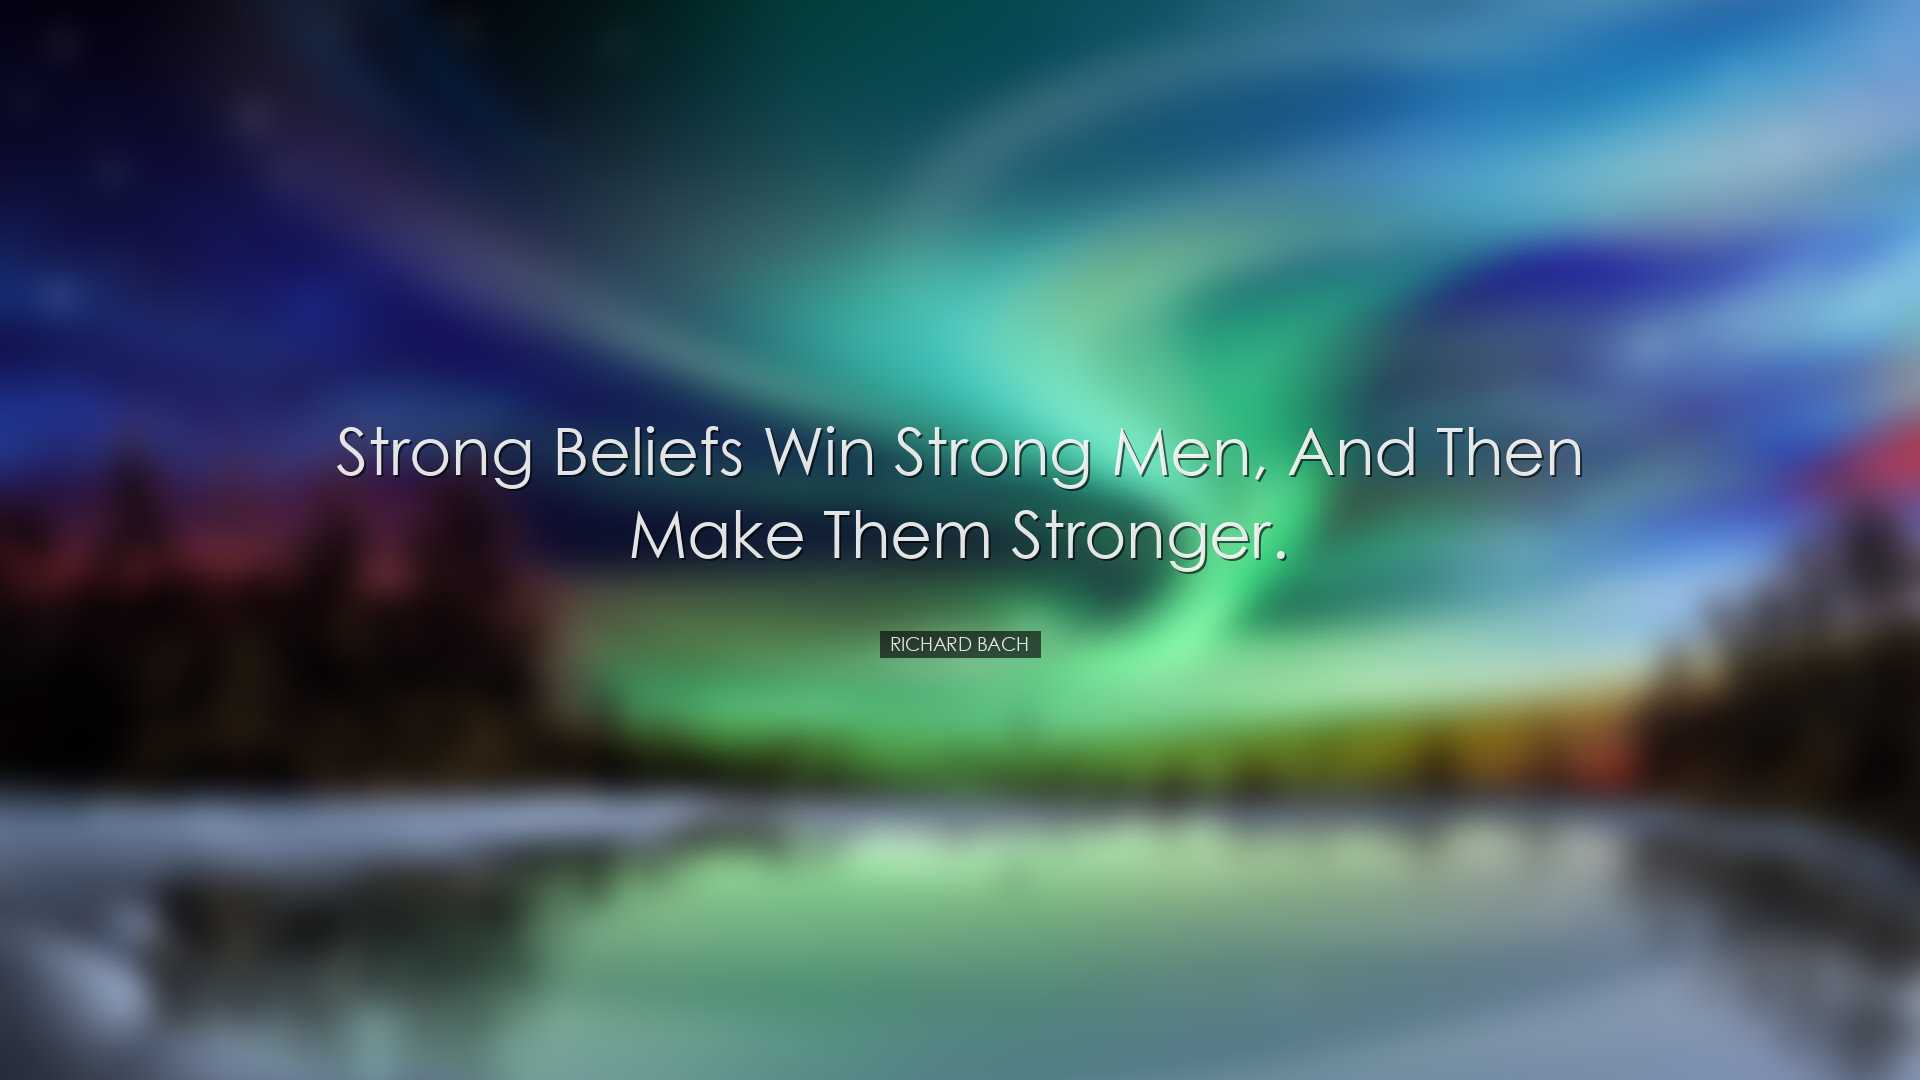 Strong beliefs win strong men, and then make them stronger. - Rich